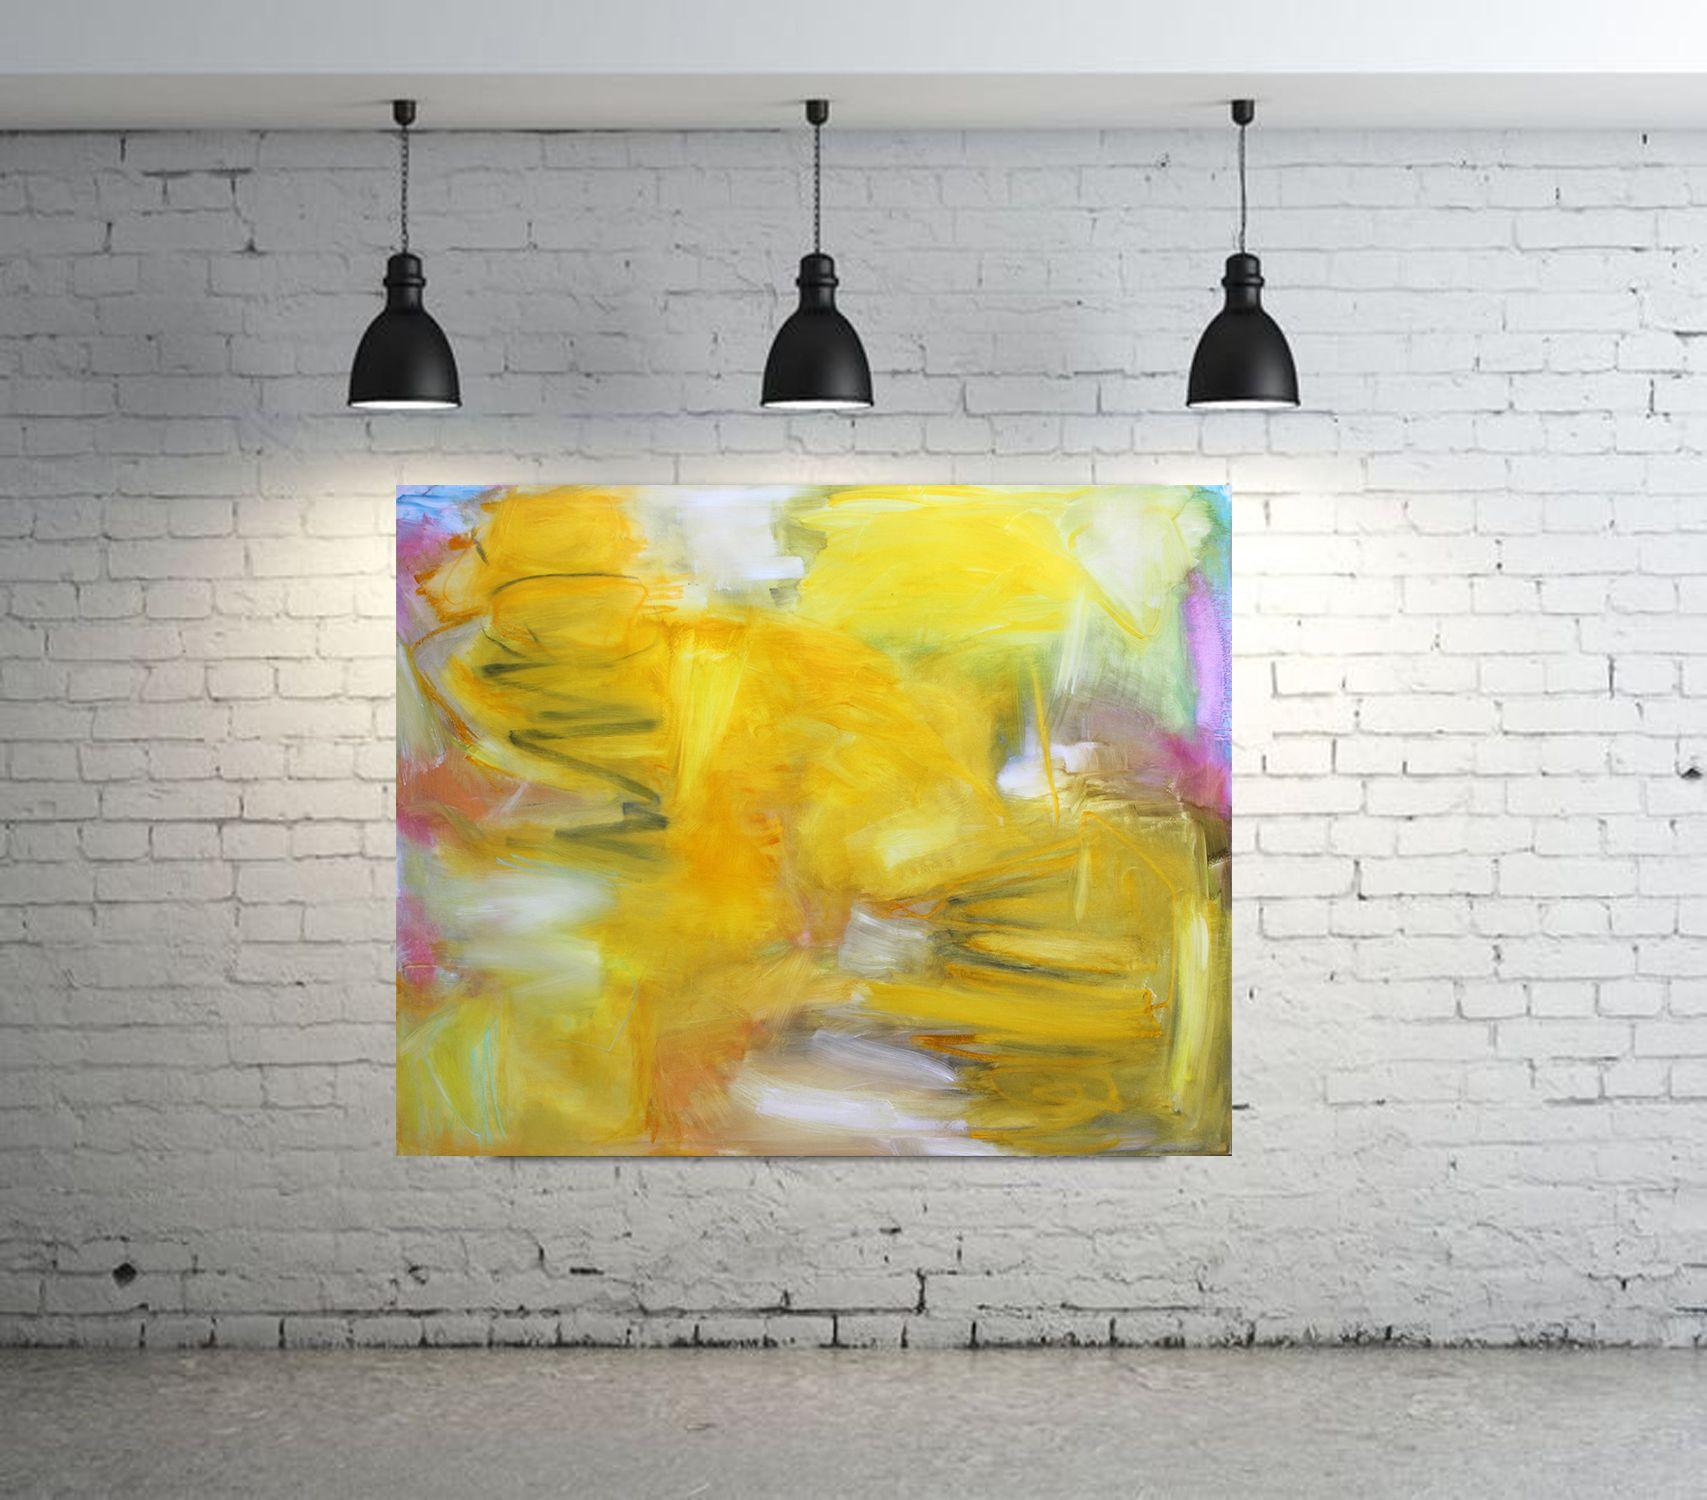 Golden Hills is a big bold abstract expressionist oil painting on Belgian linen canvas. Using oil paint allows for working wet in wet, something that isn't as possible with acrylic or a rougher, more absorbent surface. Although the brushstrokes are